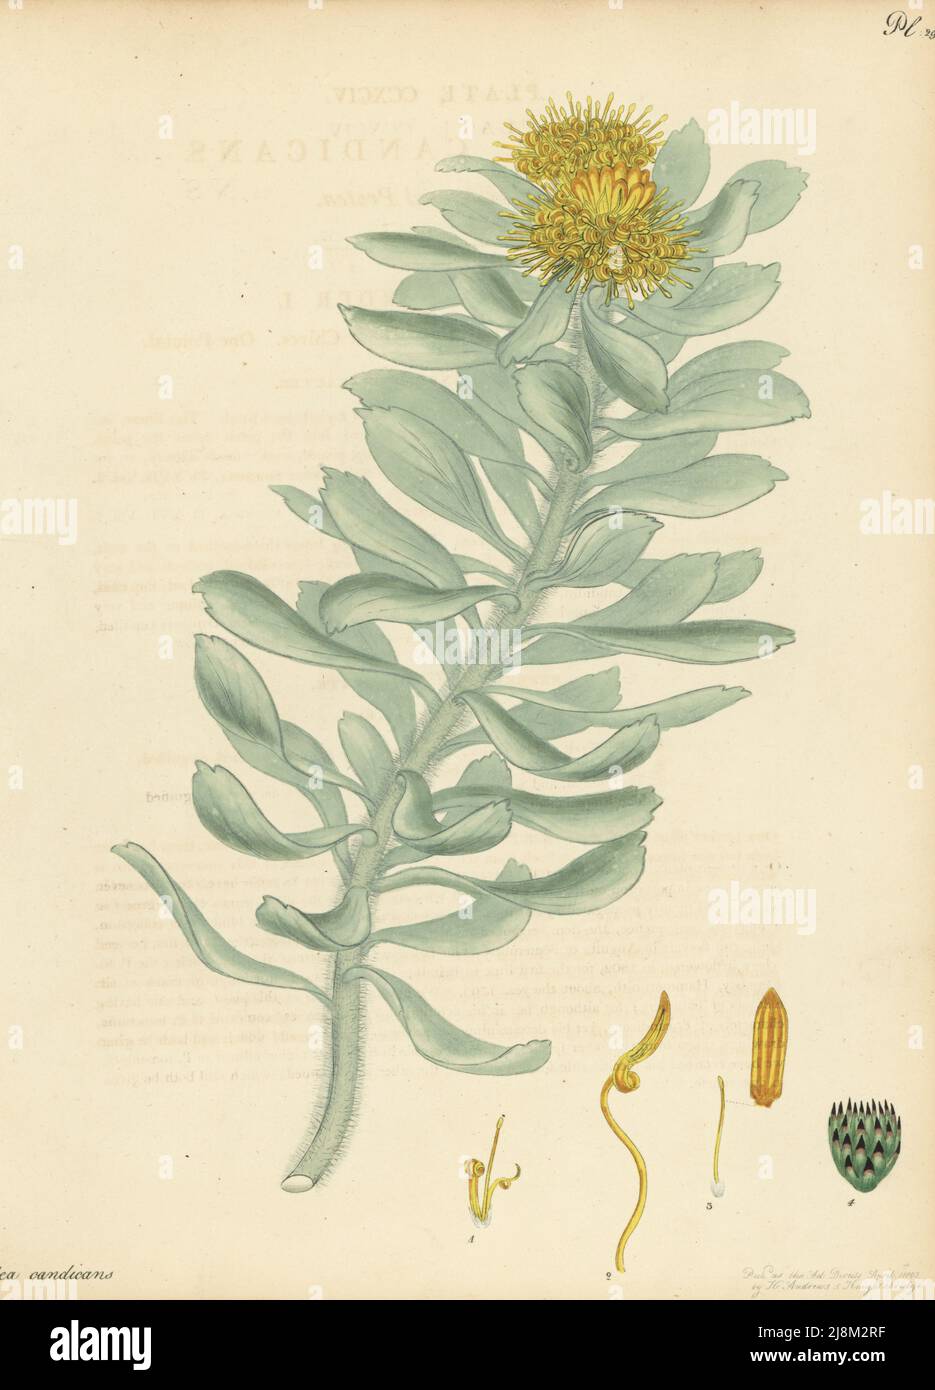 Sandveld pincushion, sandluisie or sandveldluisiesbos, Leucospermum rodolentum. Hoary-leaved protea, Protea candicans. From the Cape of Good Hope, South Africa, in the George Hibbert collection. Copperplate engraving drawn, engraved and hand-coloured by Henry Andrews from his Botanical Register, Volume 5, self-published in Knightsbridge, London, 1803. Stock Photo